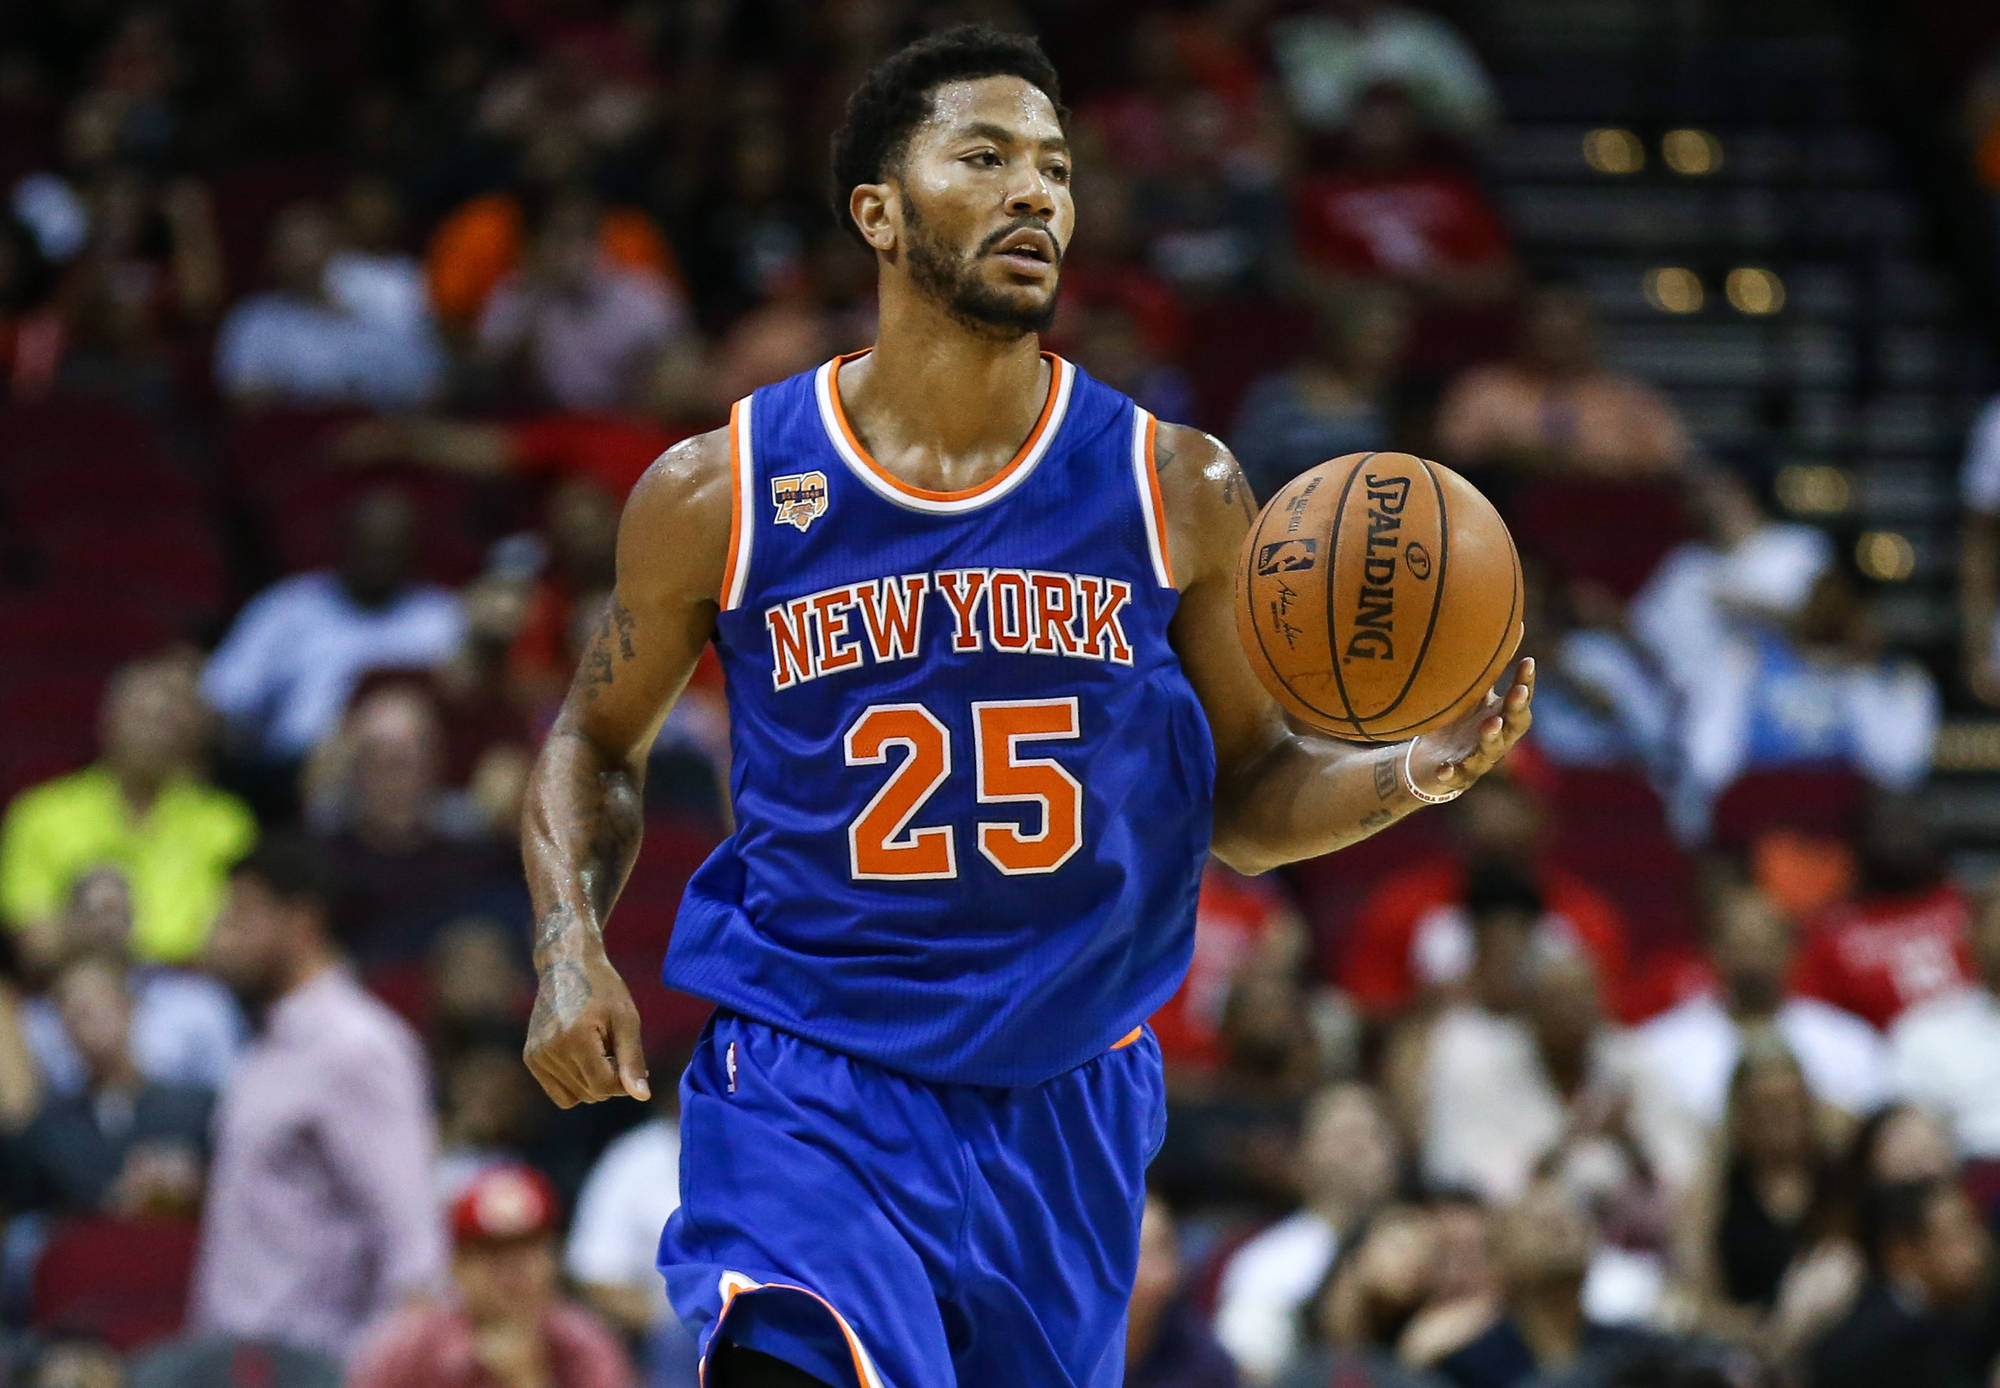 Breaking News: Derrick Rose cleared of all charges!